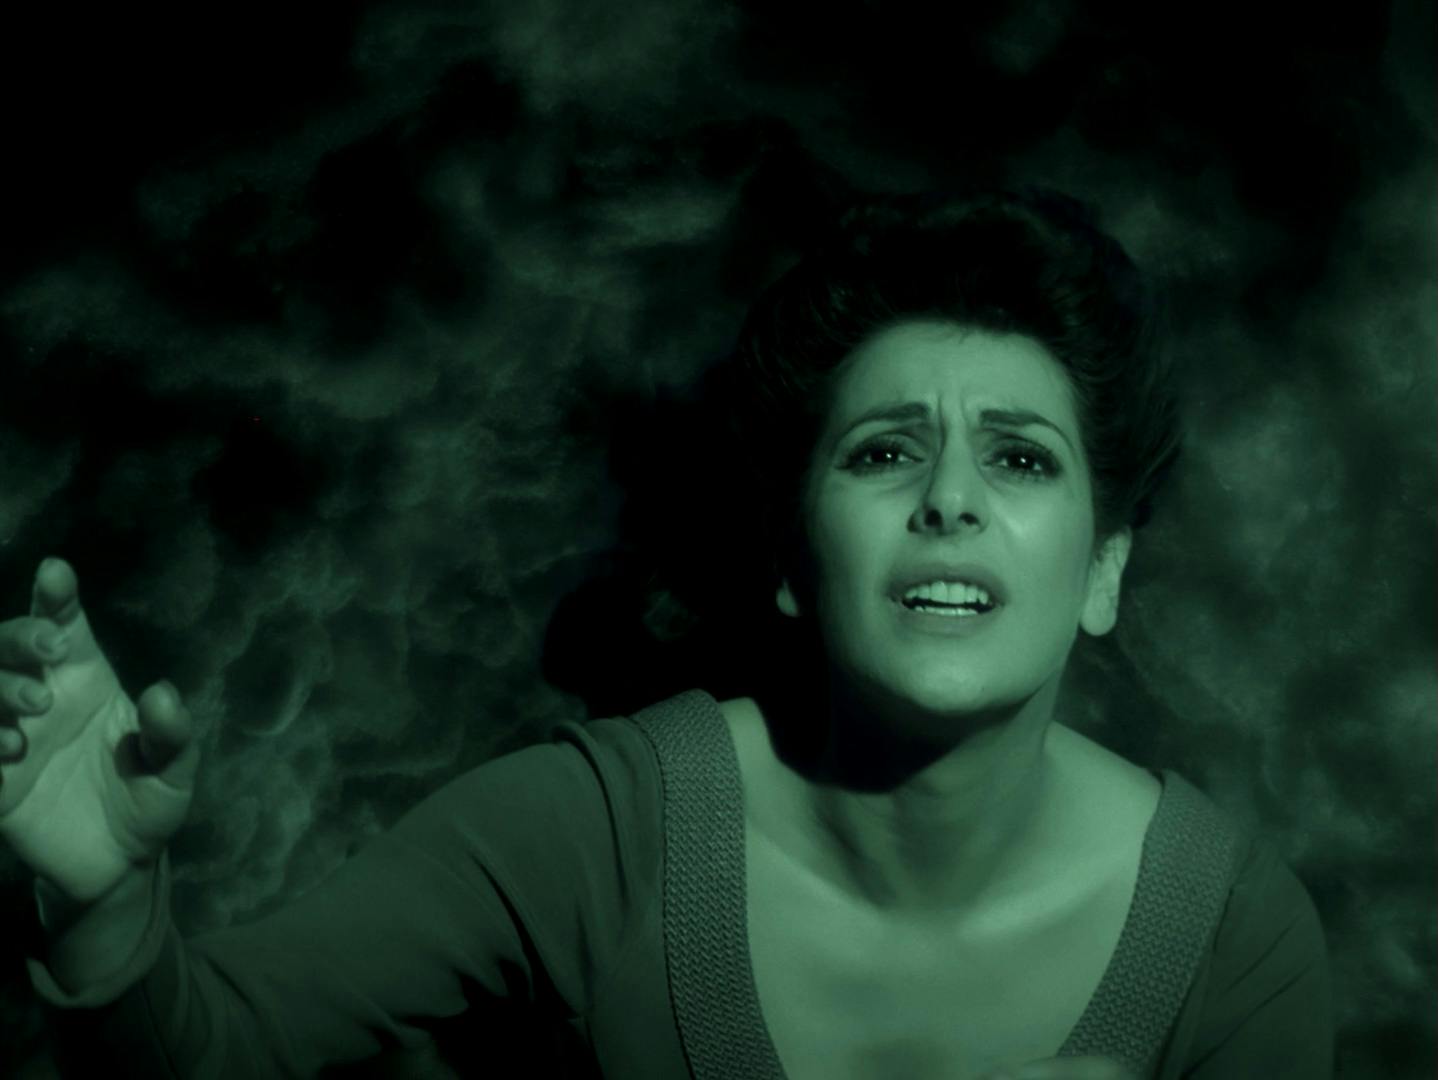 Deanna Troi distorts her face in pain and anguish as she looks above her towards an unknown entity in 'Night Terrors'